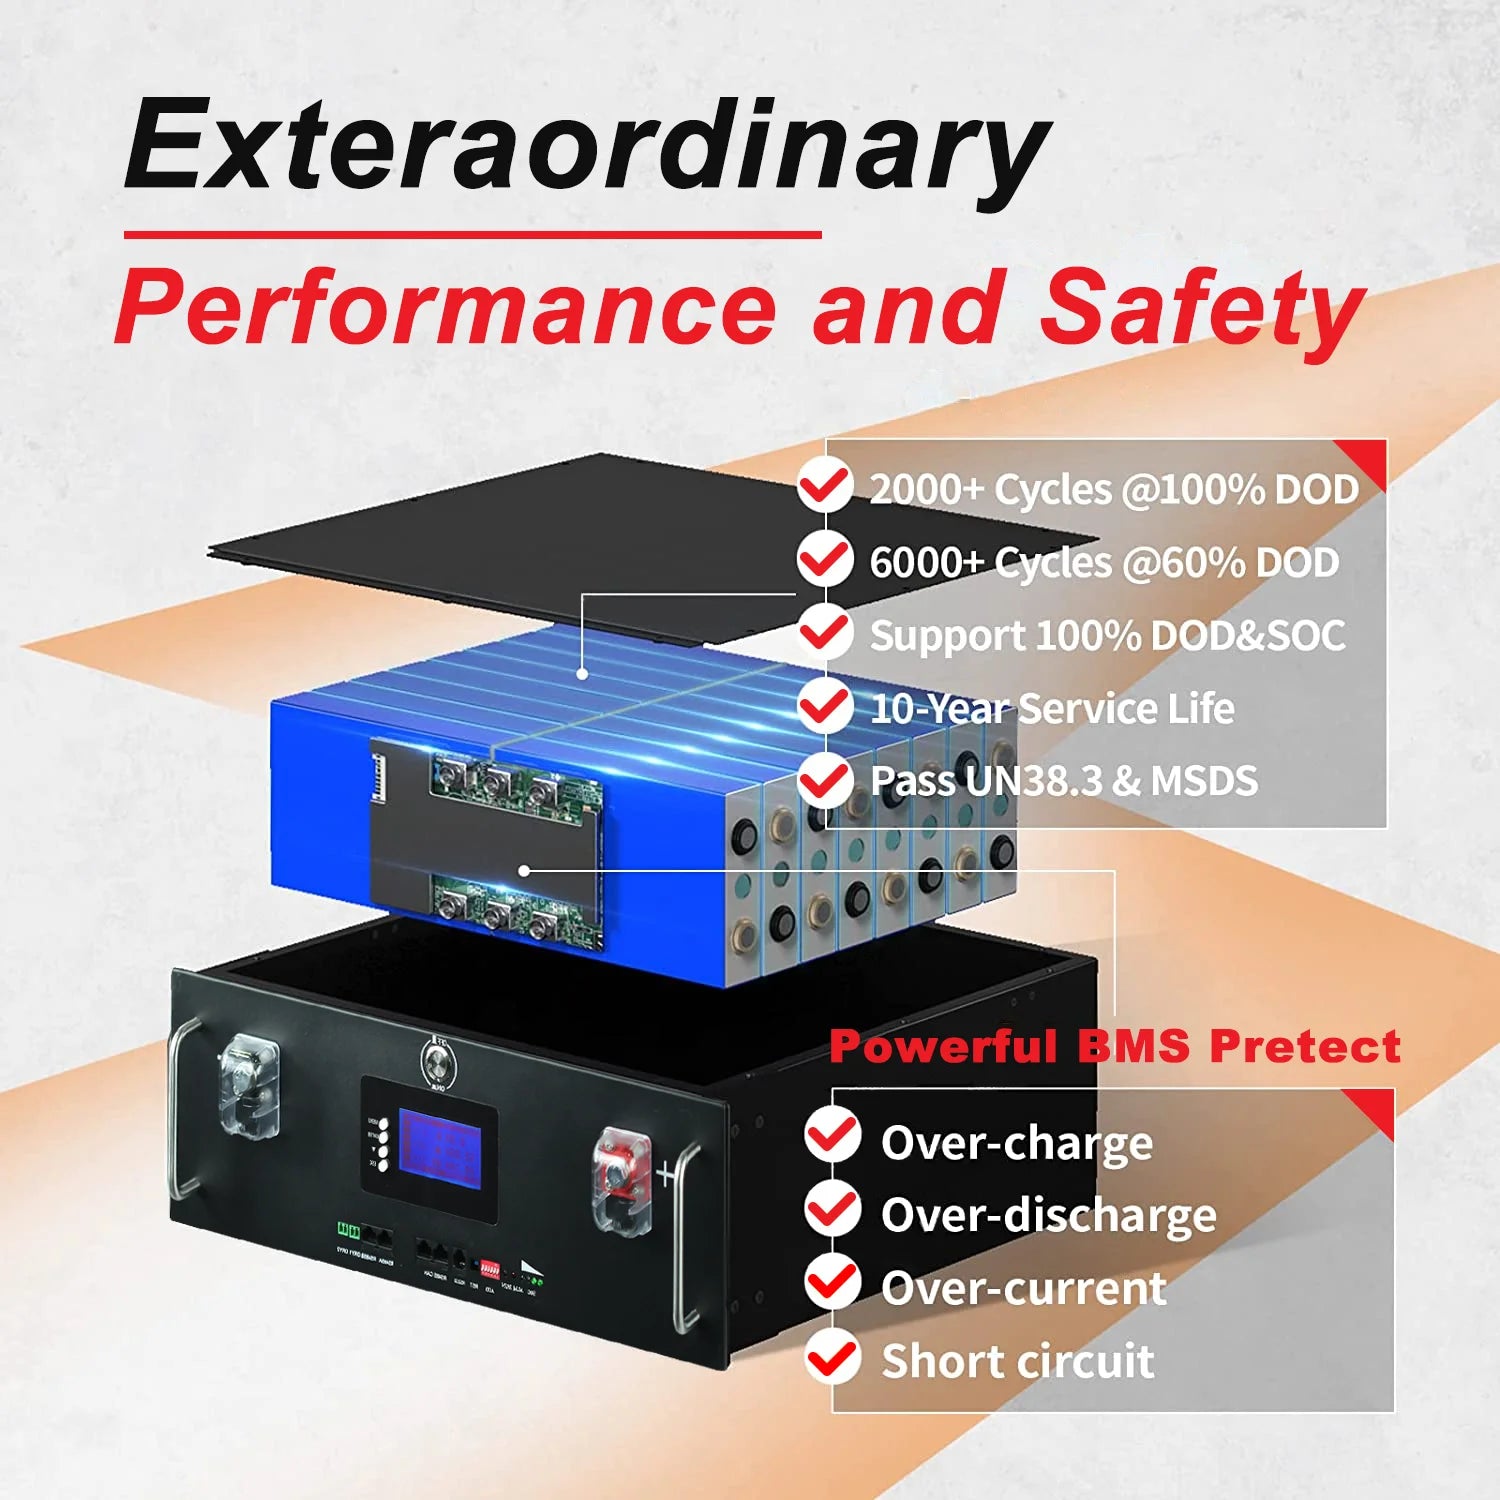 48V 100Ah 200Ah Lifepo4 Battery, Lithium-ion battery pack with 6,000+ cycles, 10-year lifespan, and safety certifications for extraordinary performance and peace of mind.